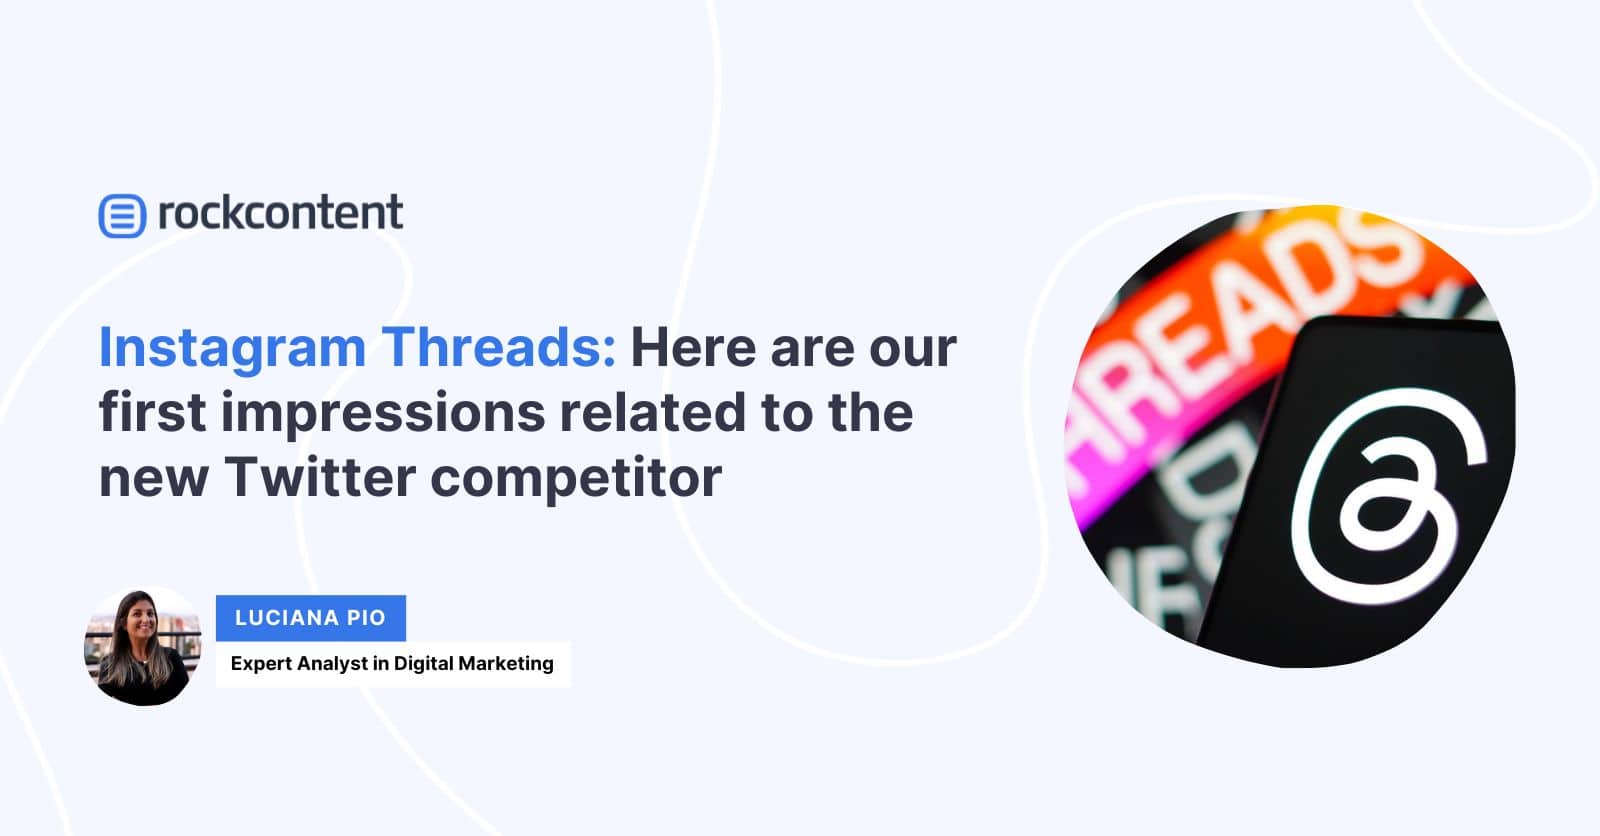 instagram-threads-first-impressions-related-to-the-new-twitter-competitor